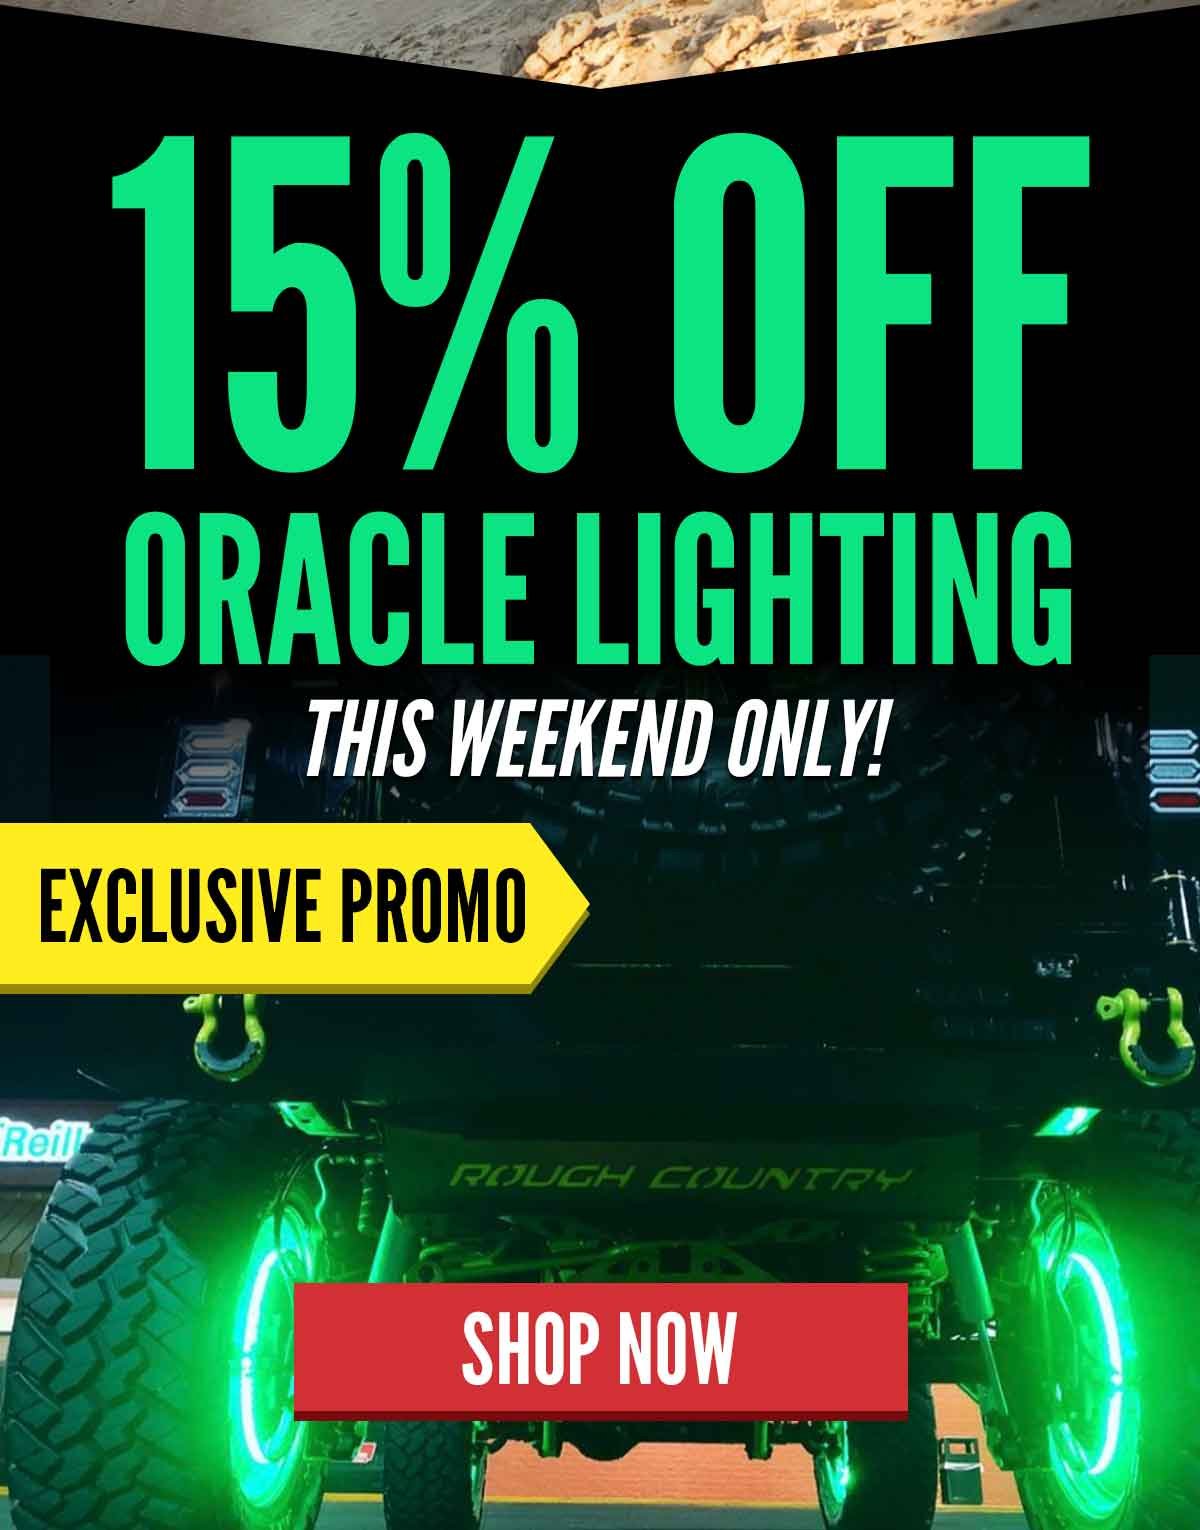 15% Off Oracle Lighting - This Weekend Only!